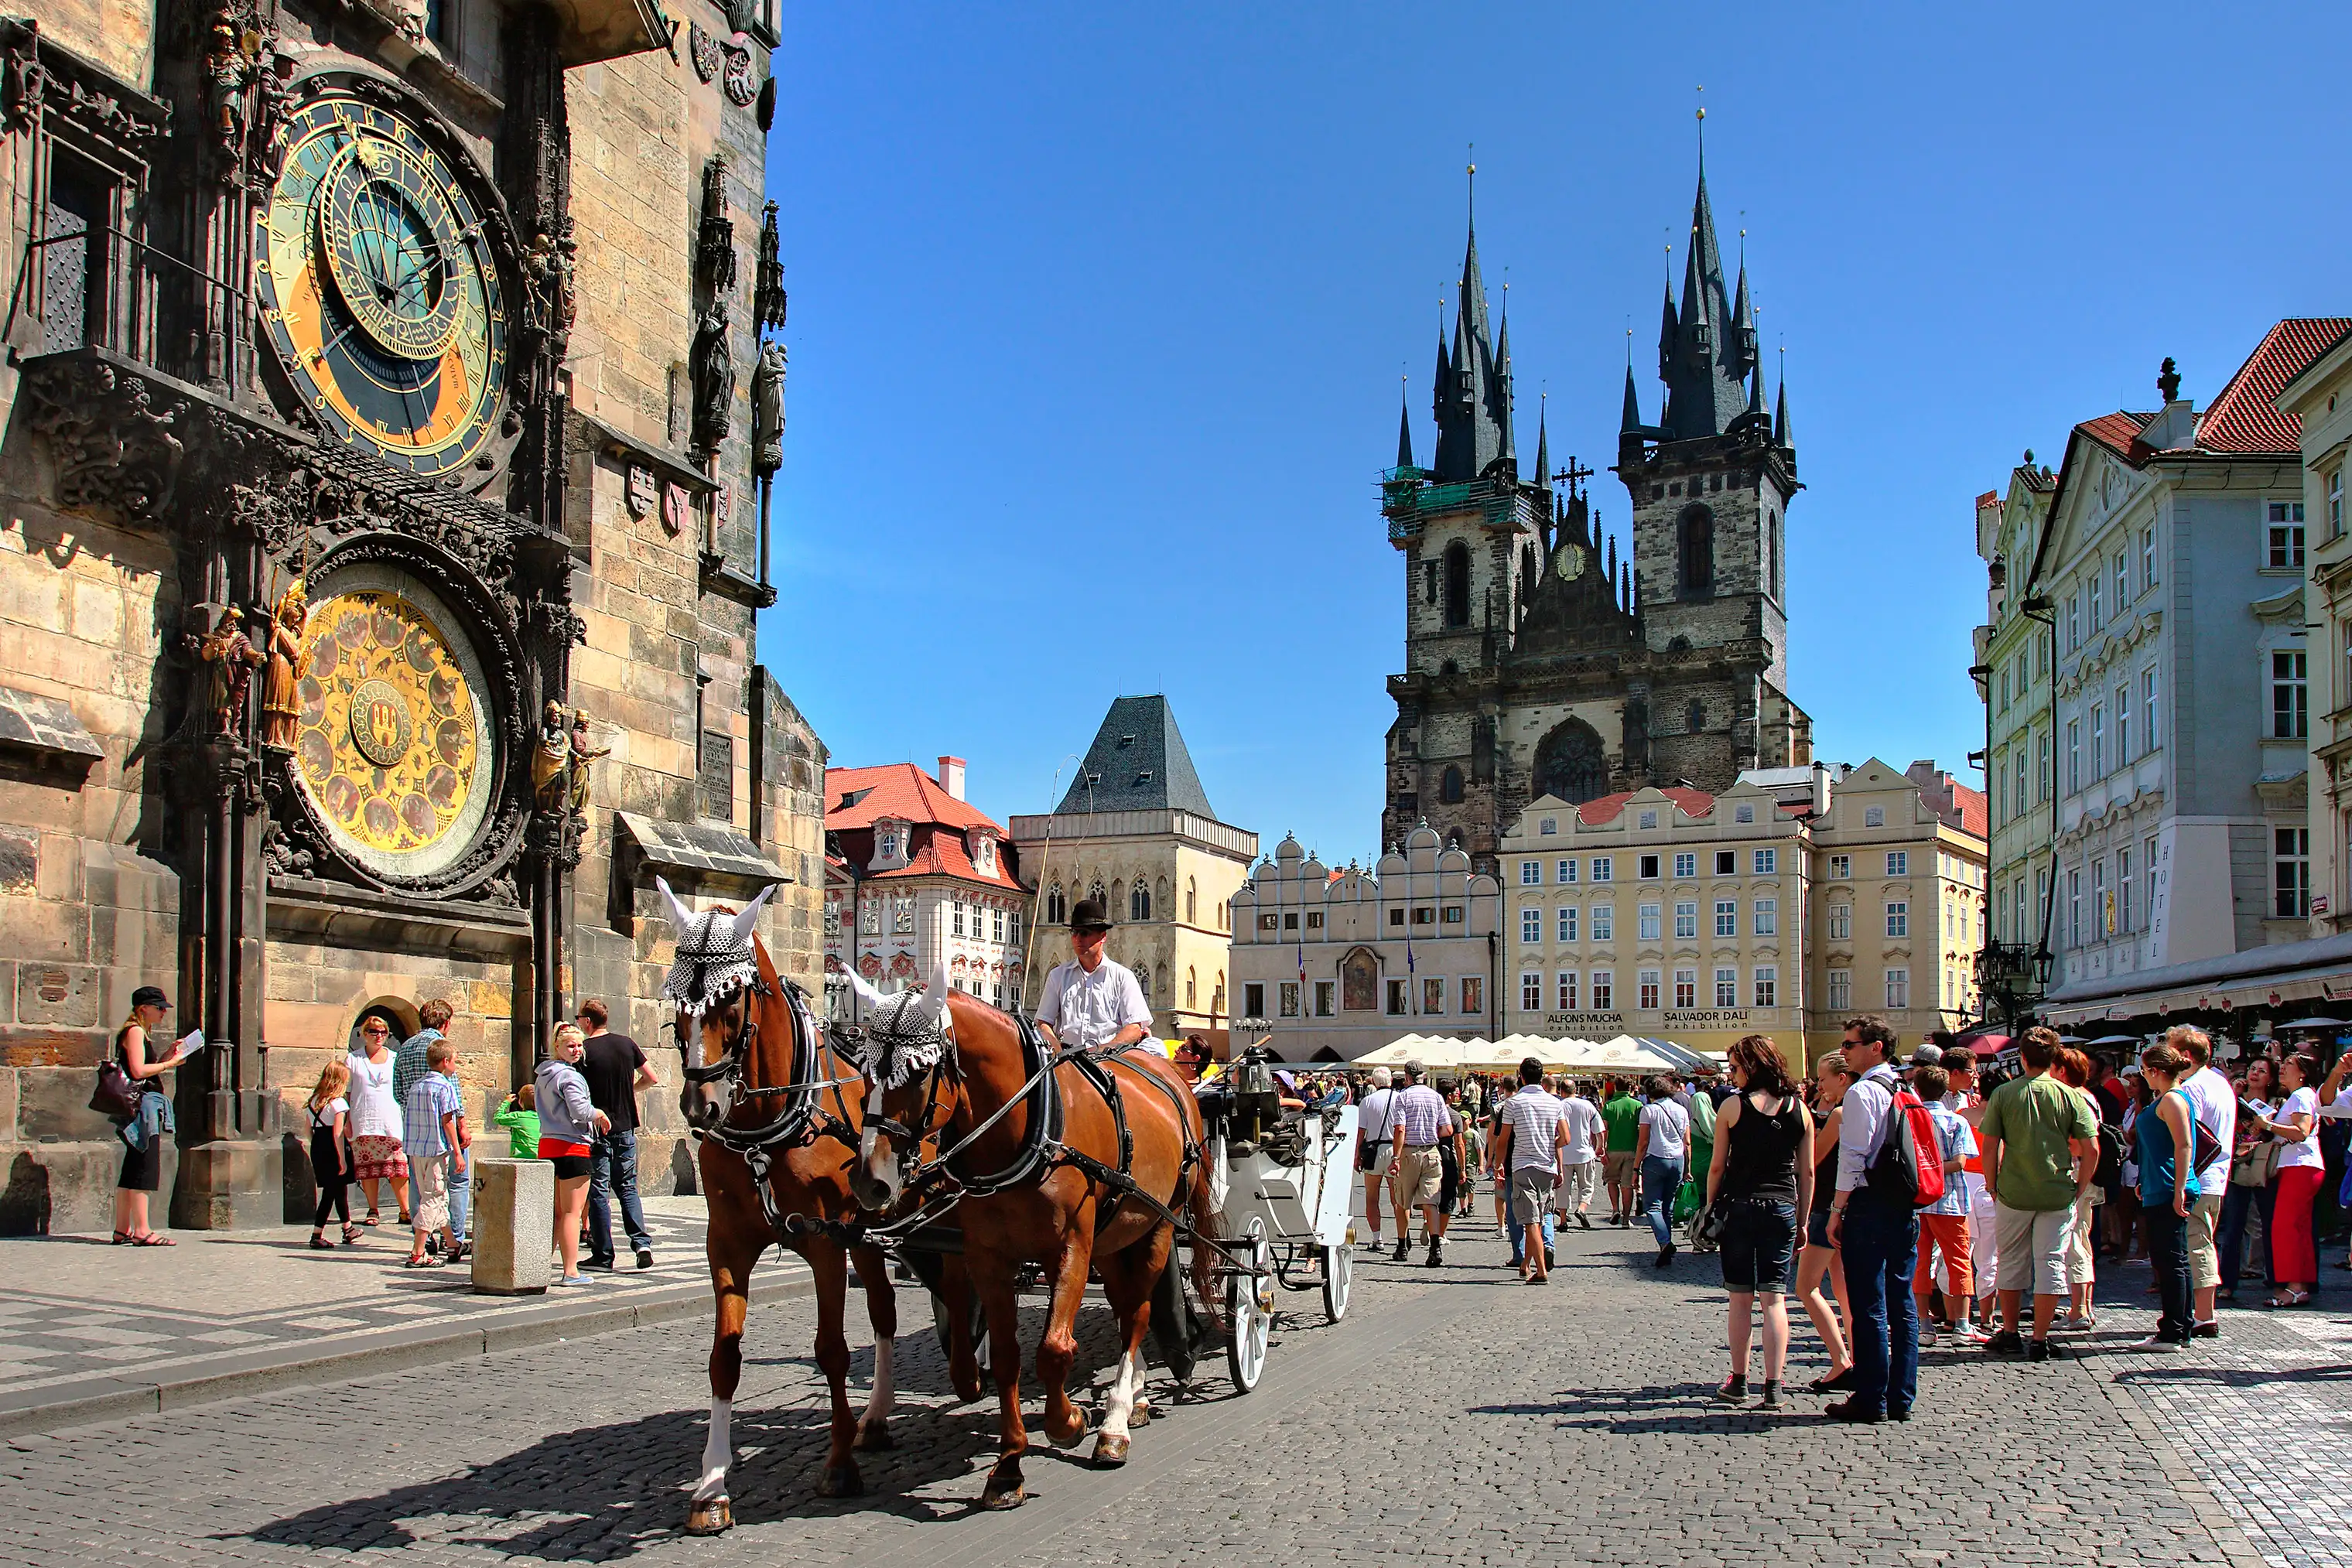 A carriage passes by the historic Old Town Square in Prague.